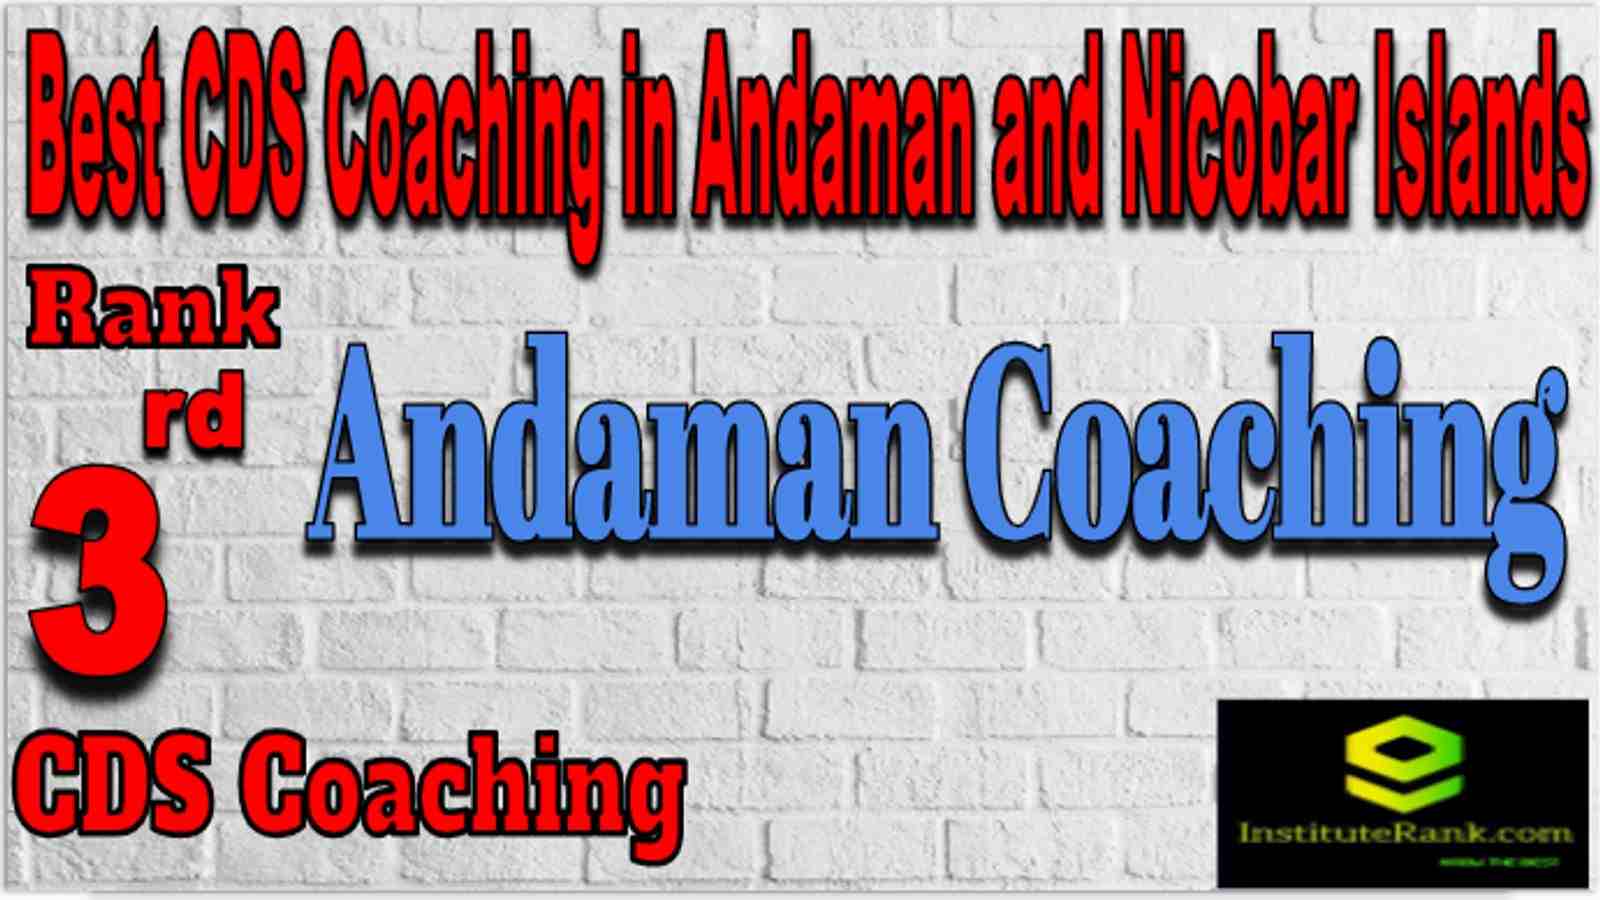 Rank 3 Best CDS Coaching in Andaman and Nicobar islands